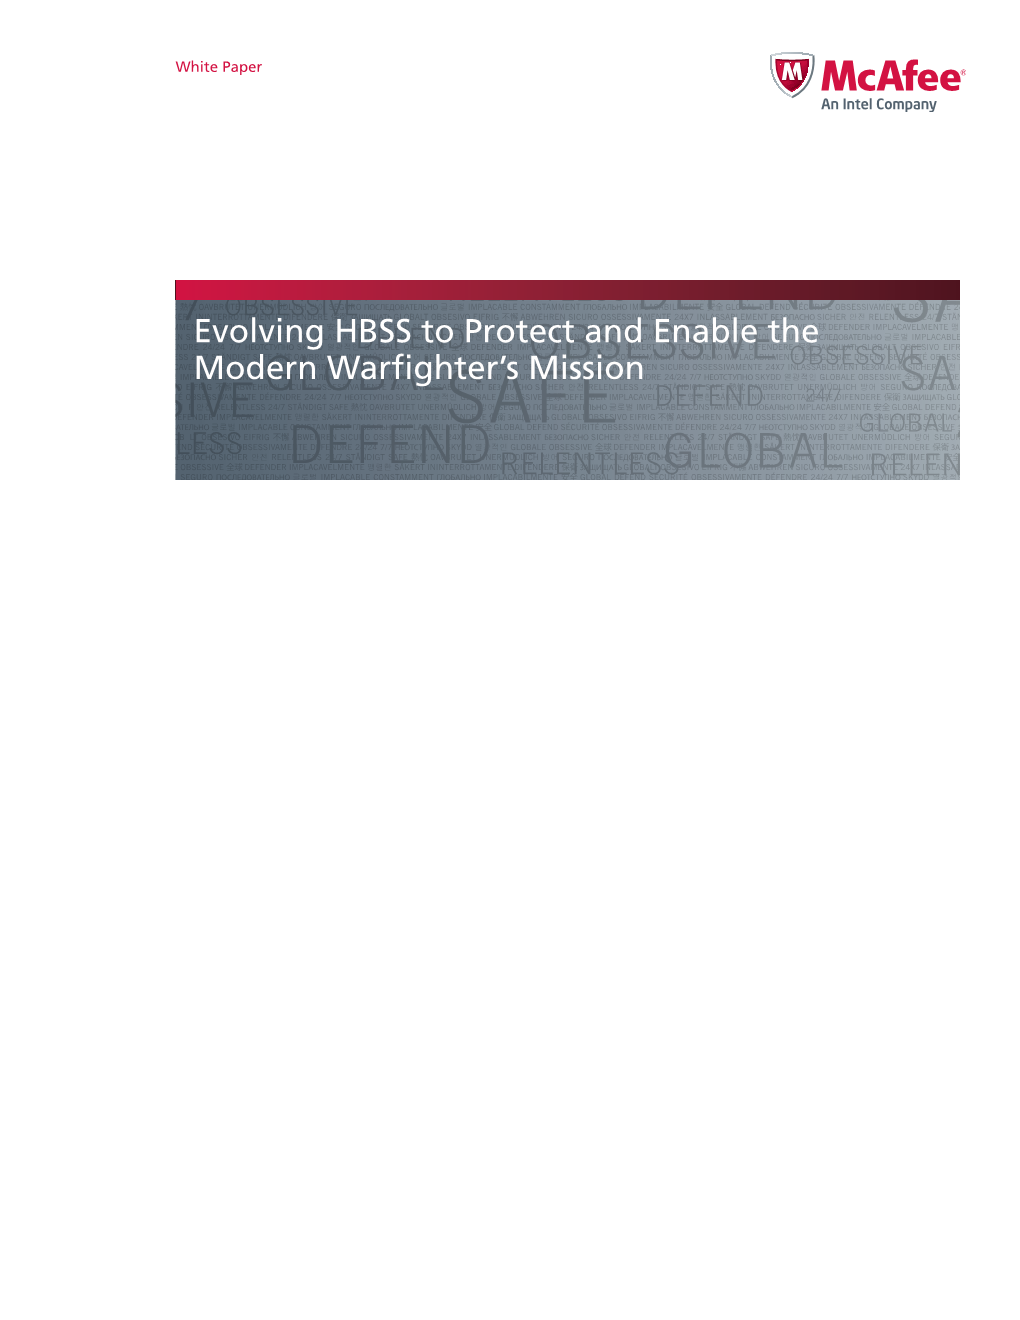 Evolving HBSS to Protect and Enable the Modern Warfighter's Mission